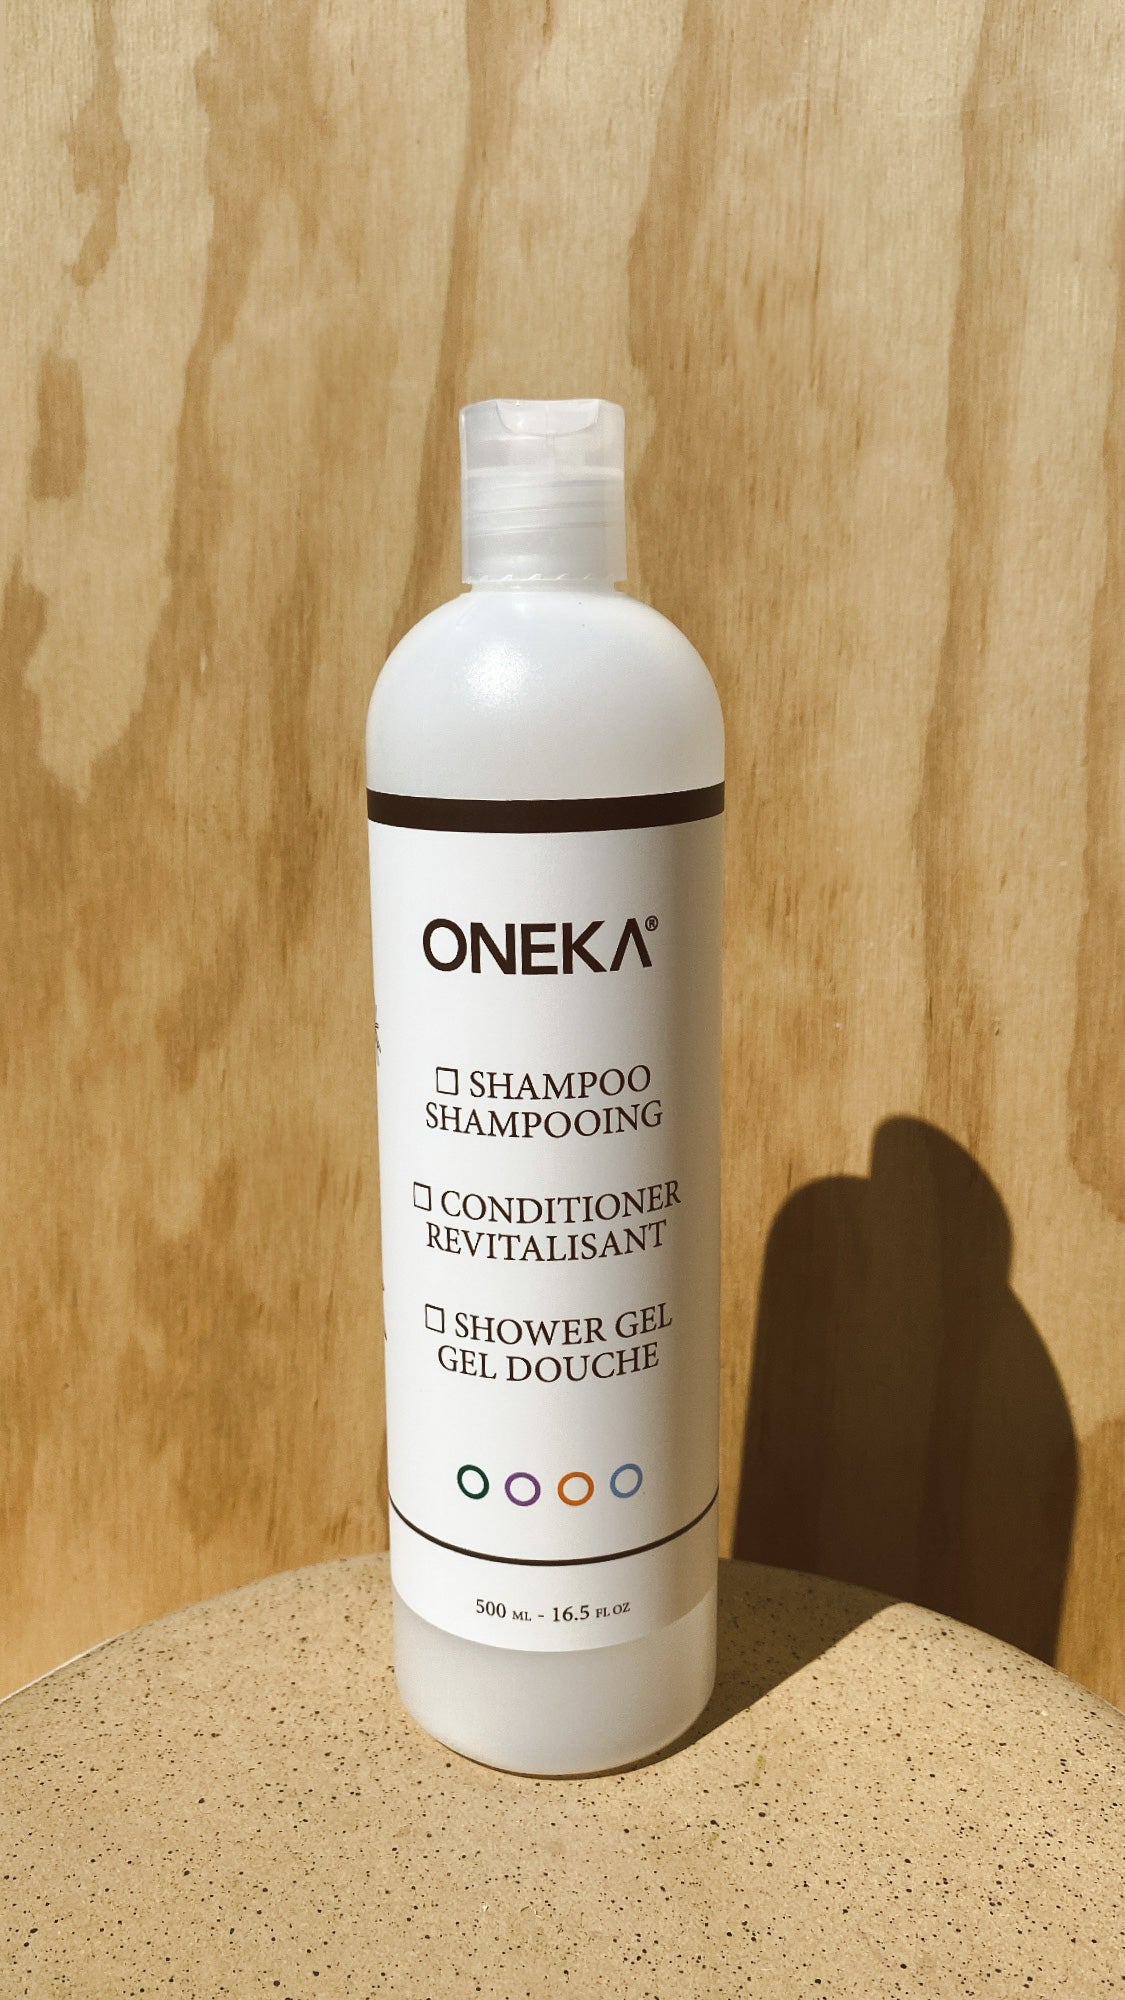 Shampoo | Lavender + Angelica by Oneka